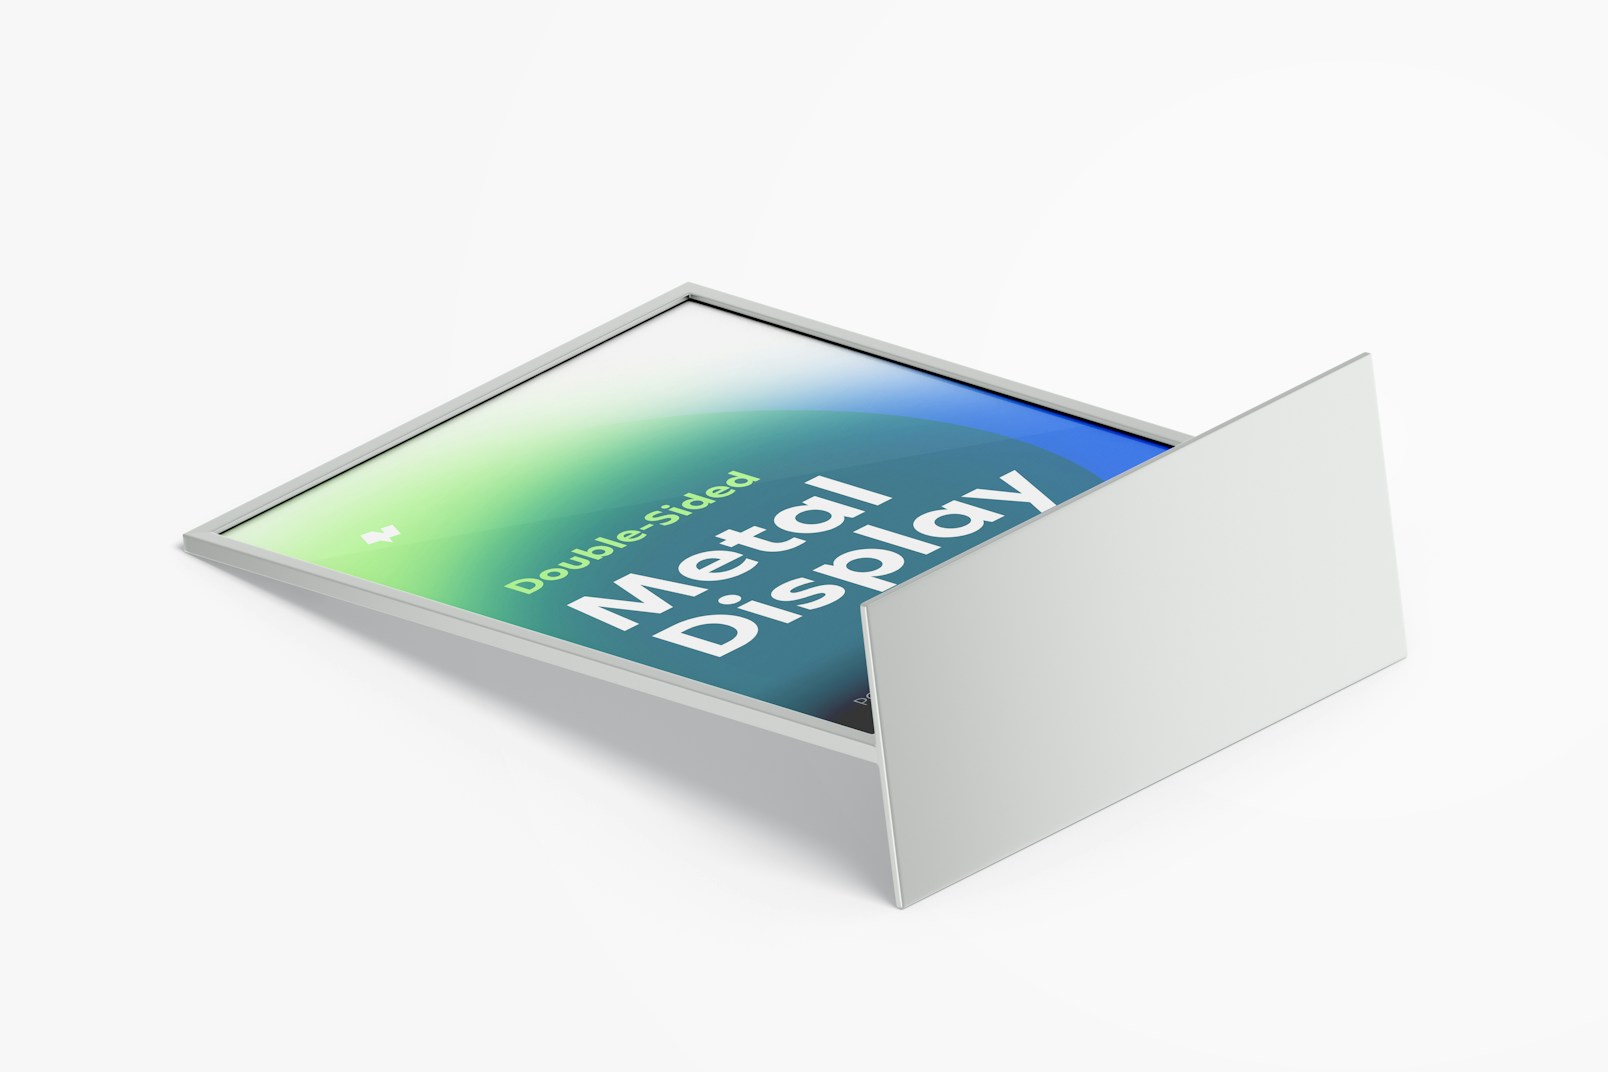 Double-Sided Poster Metal Desktop Display Mockup, Isometric View